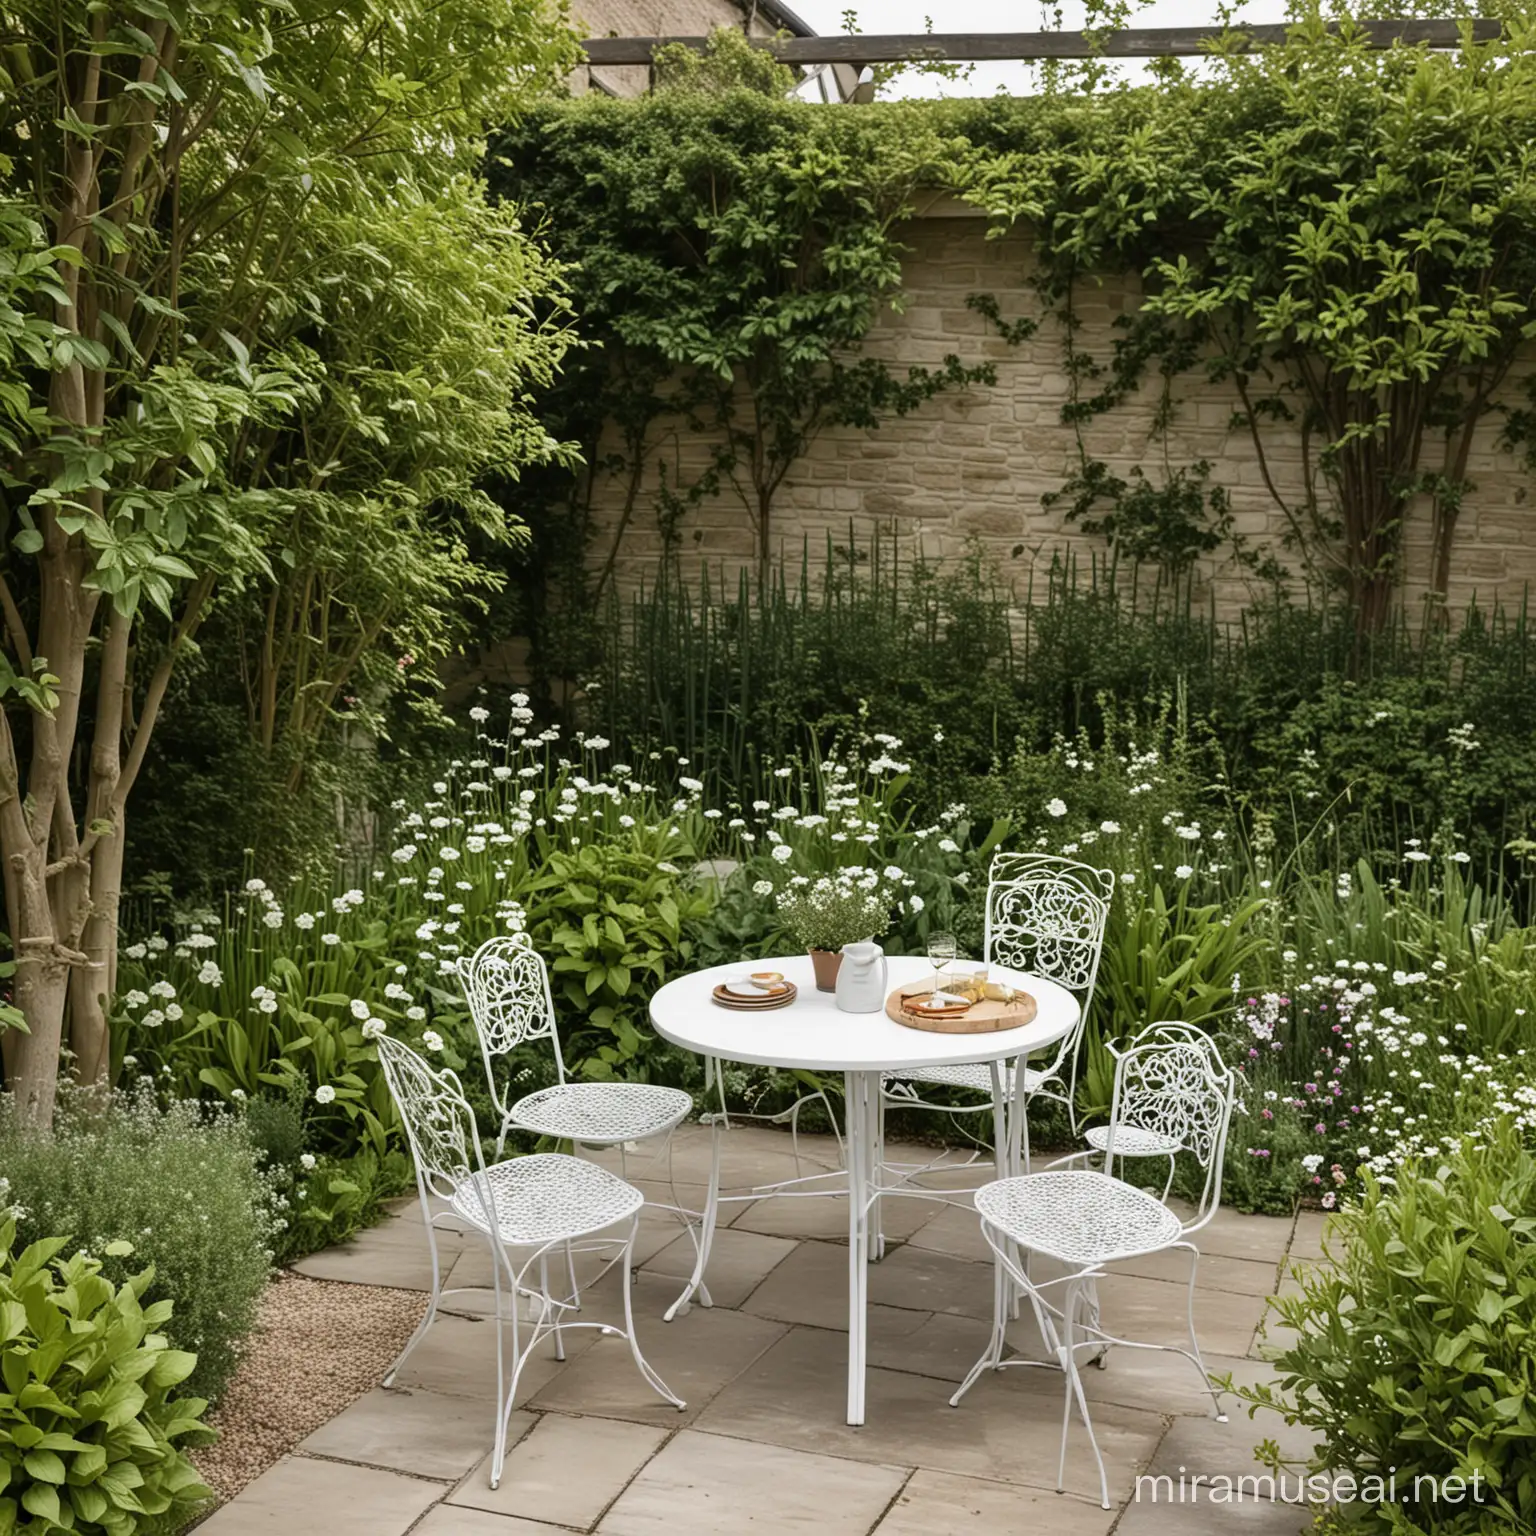 Tranquil Garden Setting with White Table and Chairs